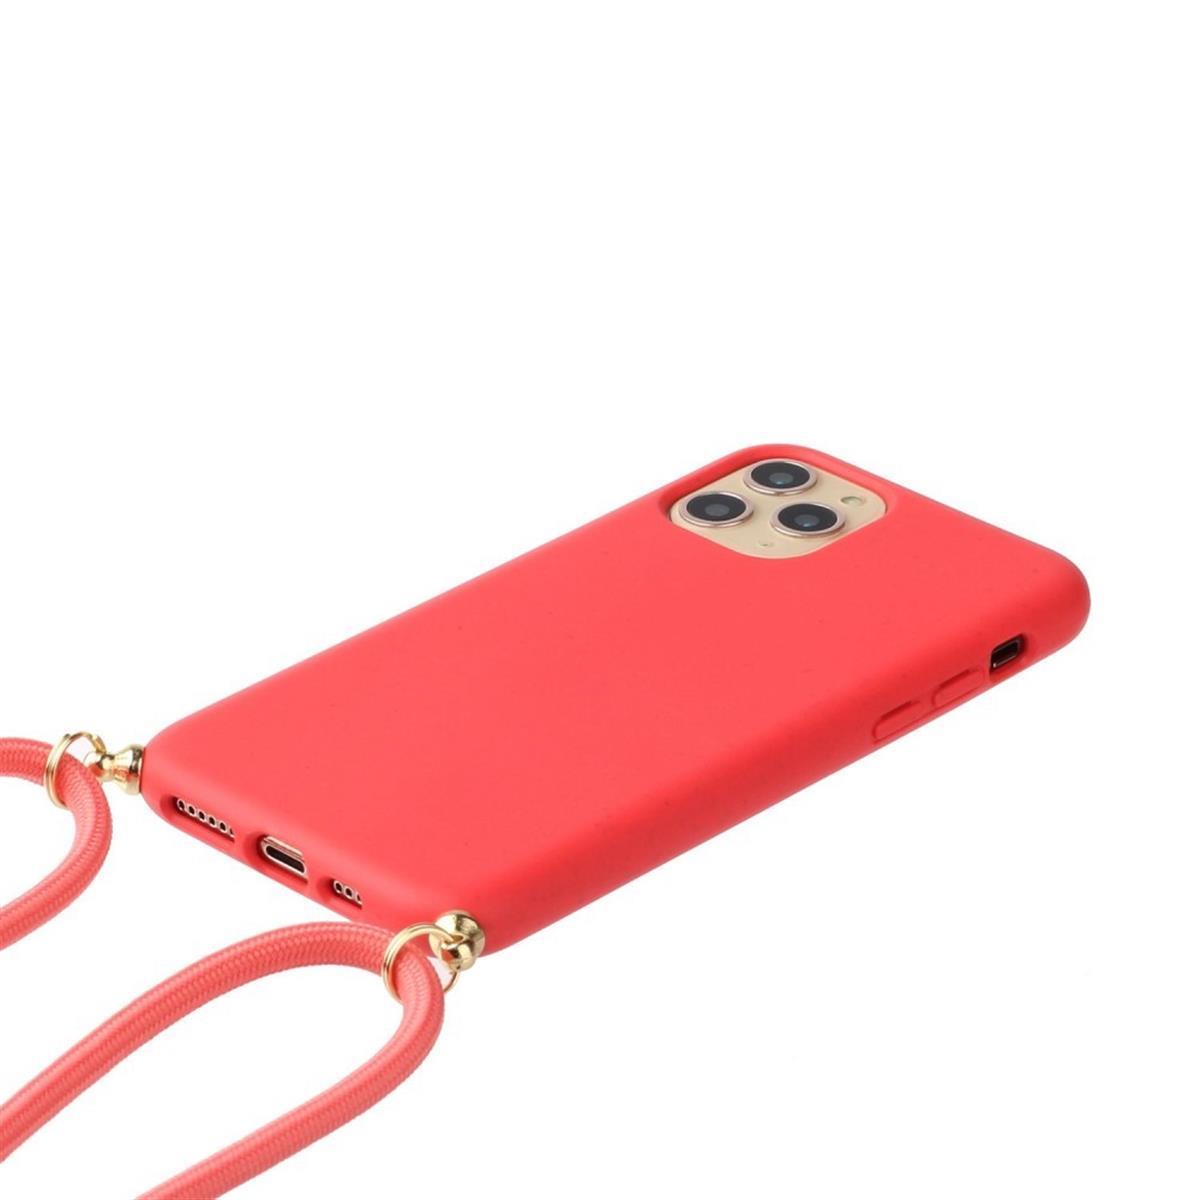 Hülle für Apple iPhone 12 Mini Handyhülle Case Band Handy Kette Cover Rot